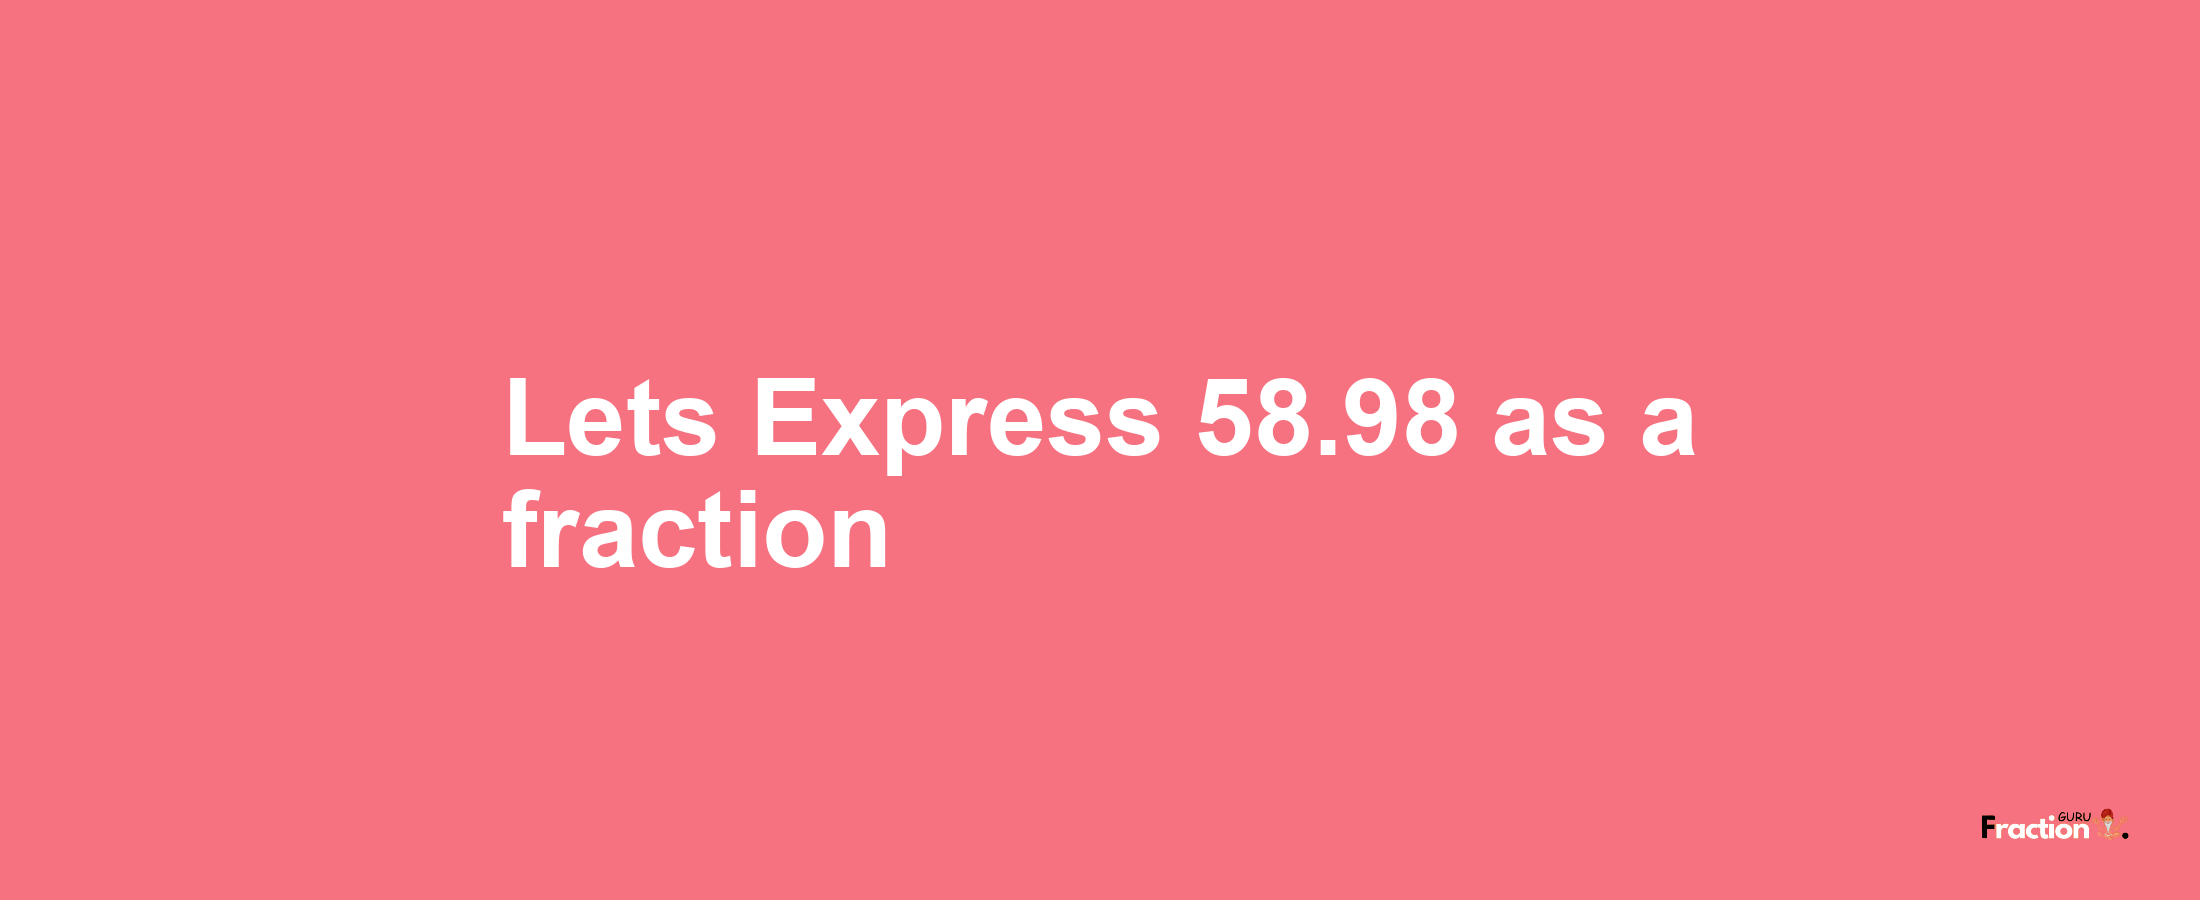 Lets Express 58.98 as afraction